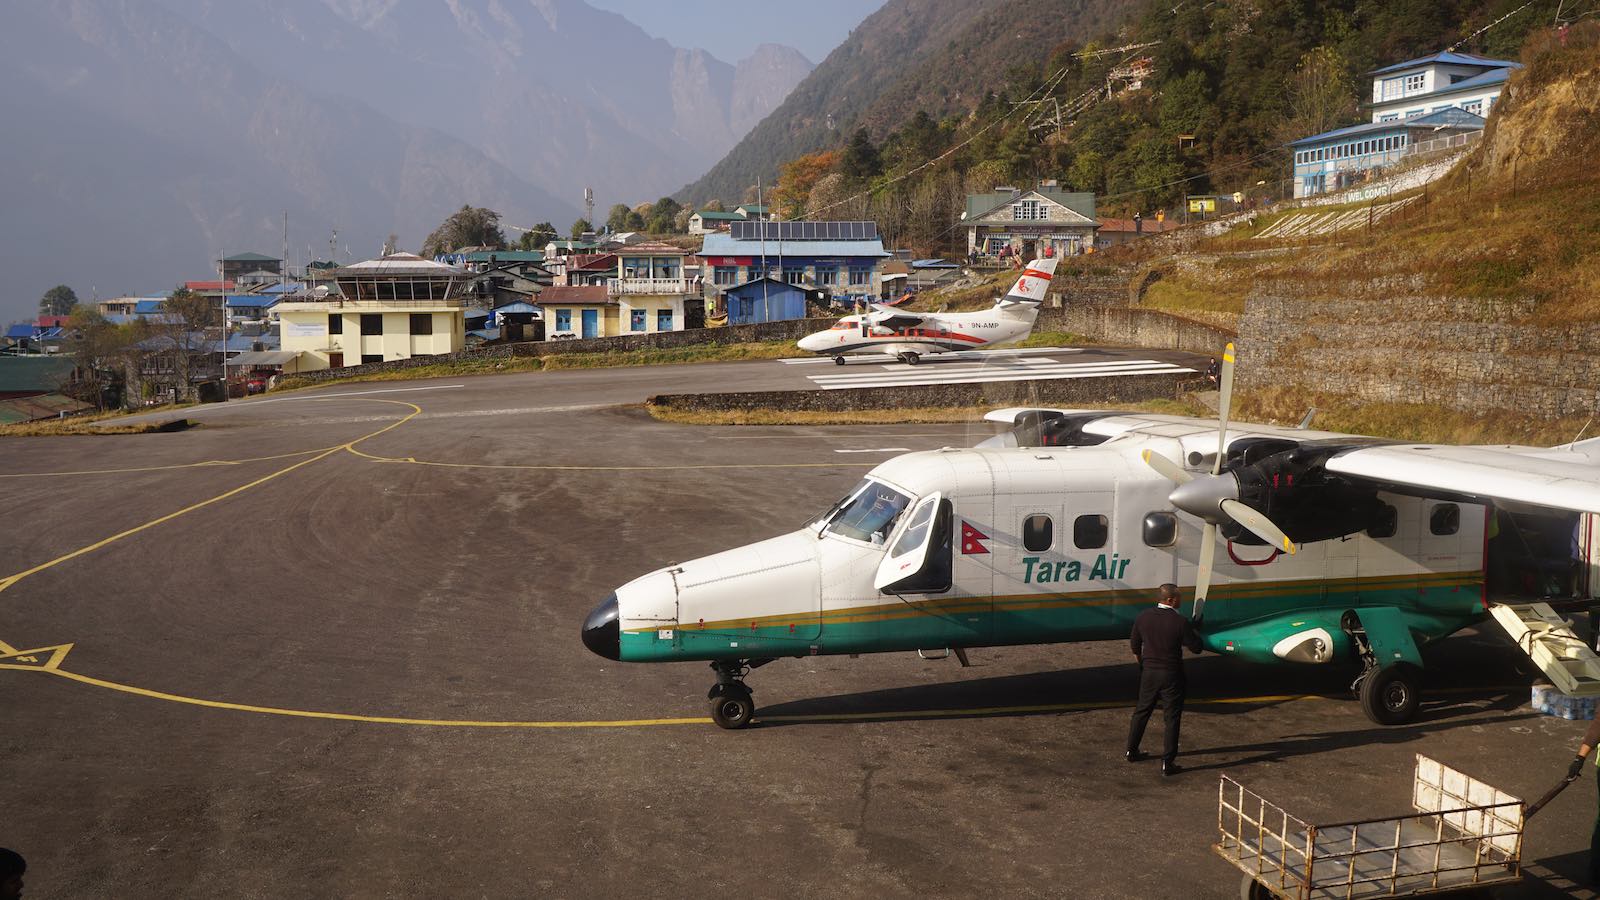 Spent the day at the chaotic Lukla Airport watching flights take off at the most dangerous airport in the world